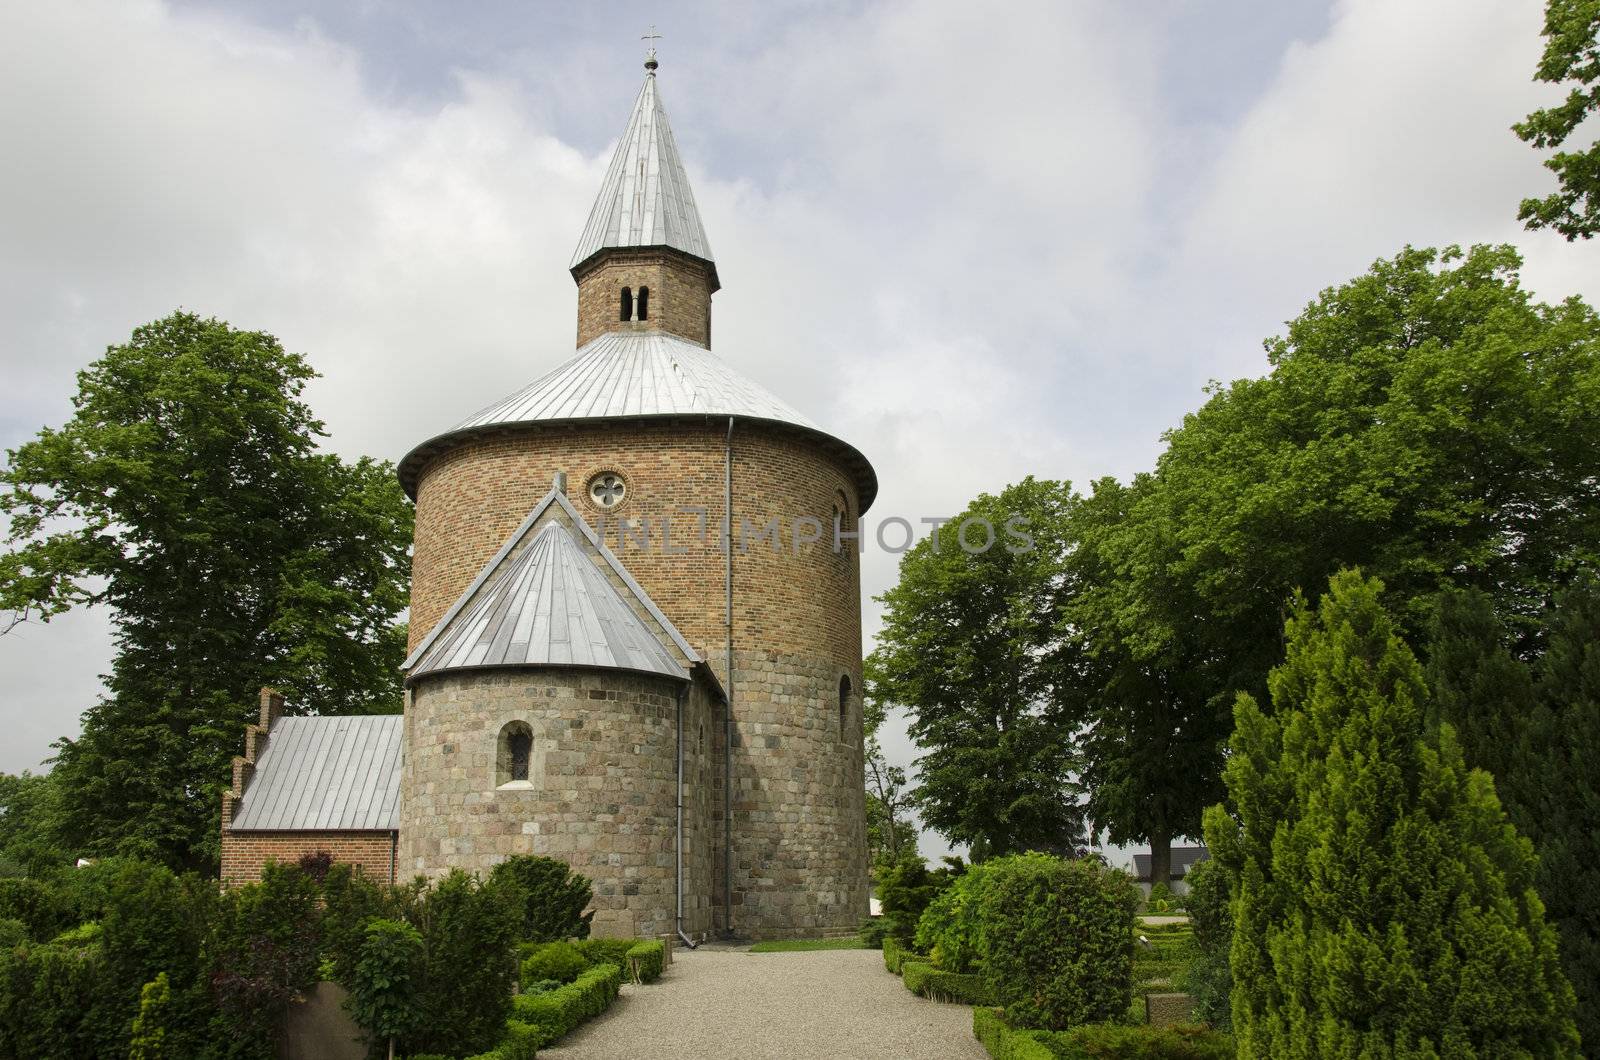 round church (rundkirke) of Bjernede, Denmark, famous church from the middle ages